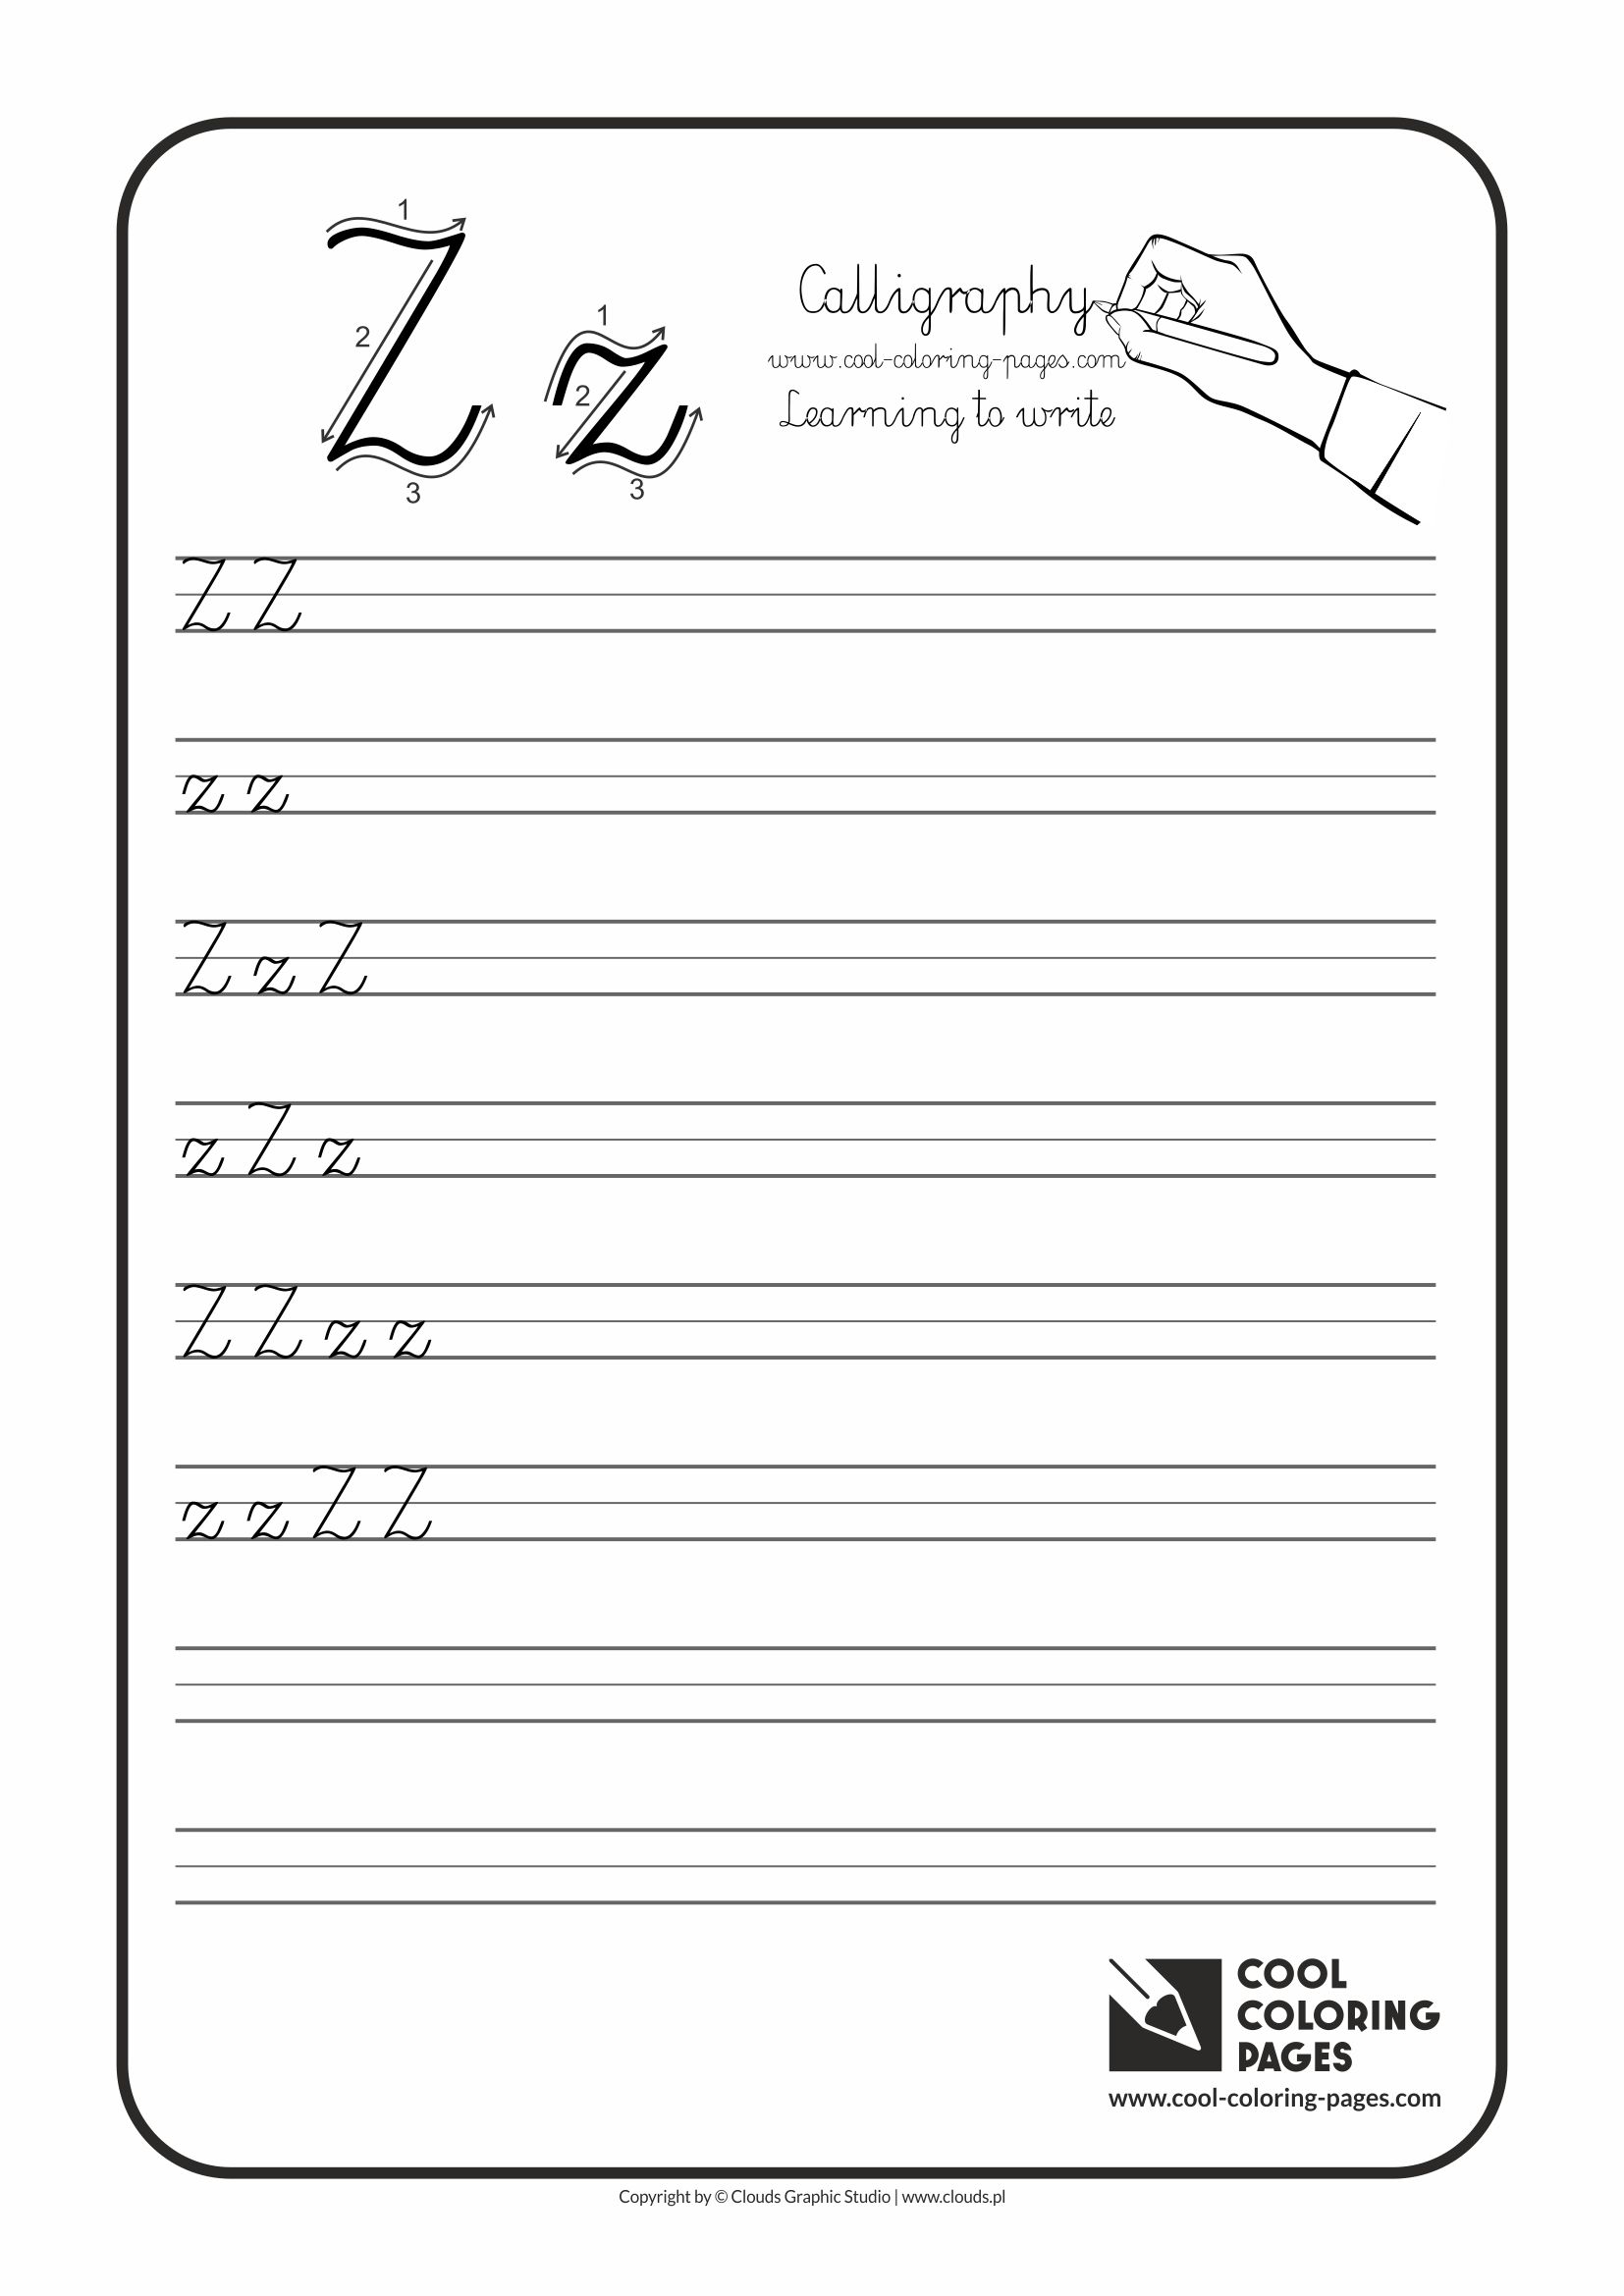 Cool Coloring Pages / Calligraphy / Letter Z - Handwriting for kids / Worksheets